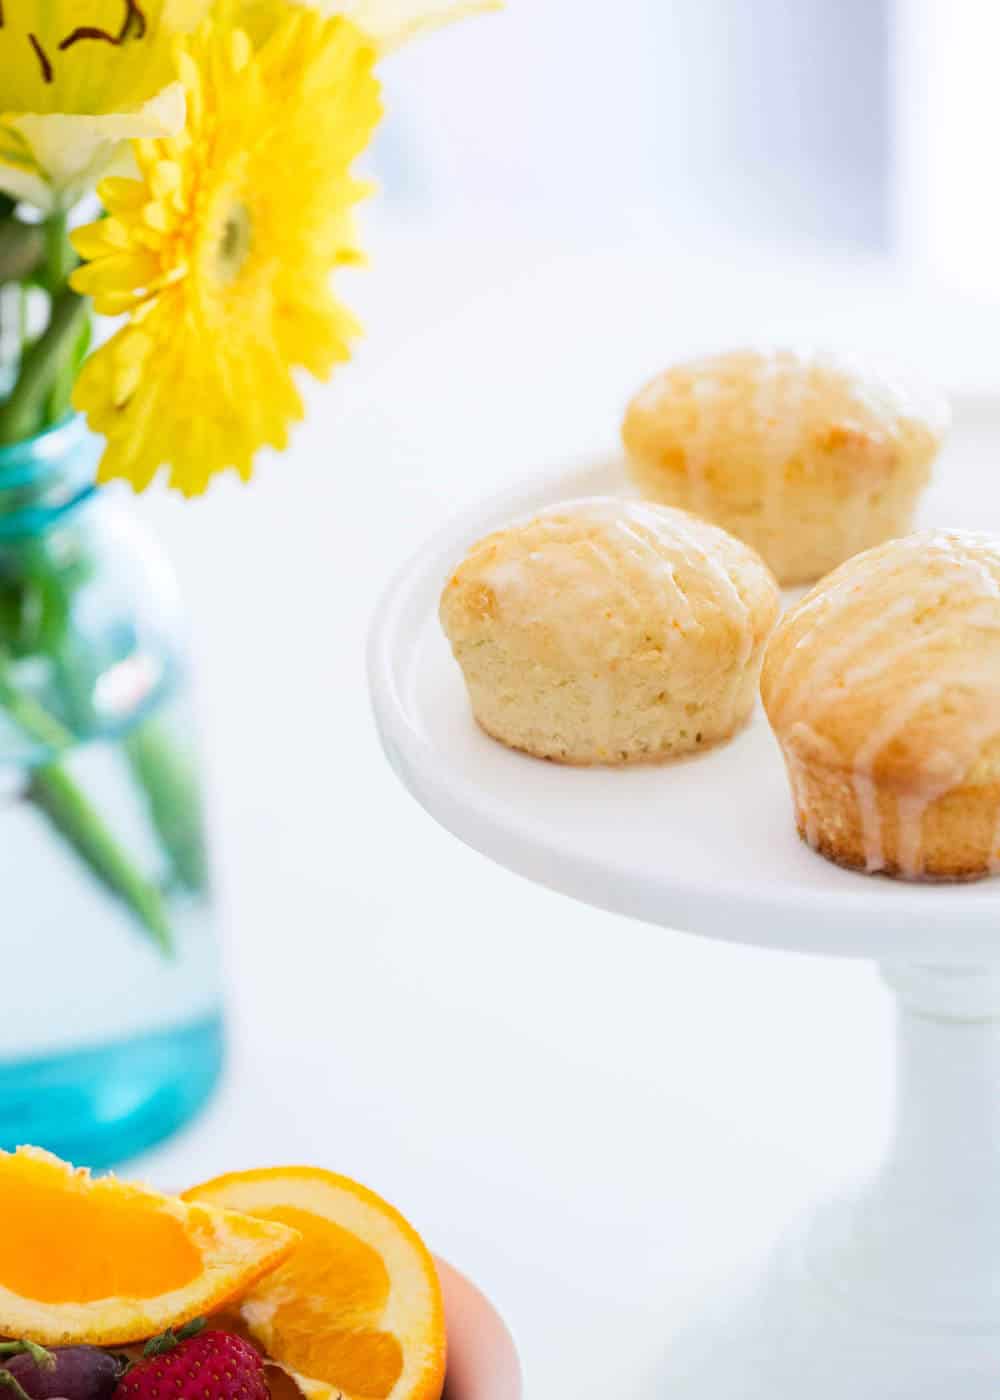 Orange muffins on a cake stand next to a vase of yellow flowers.